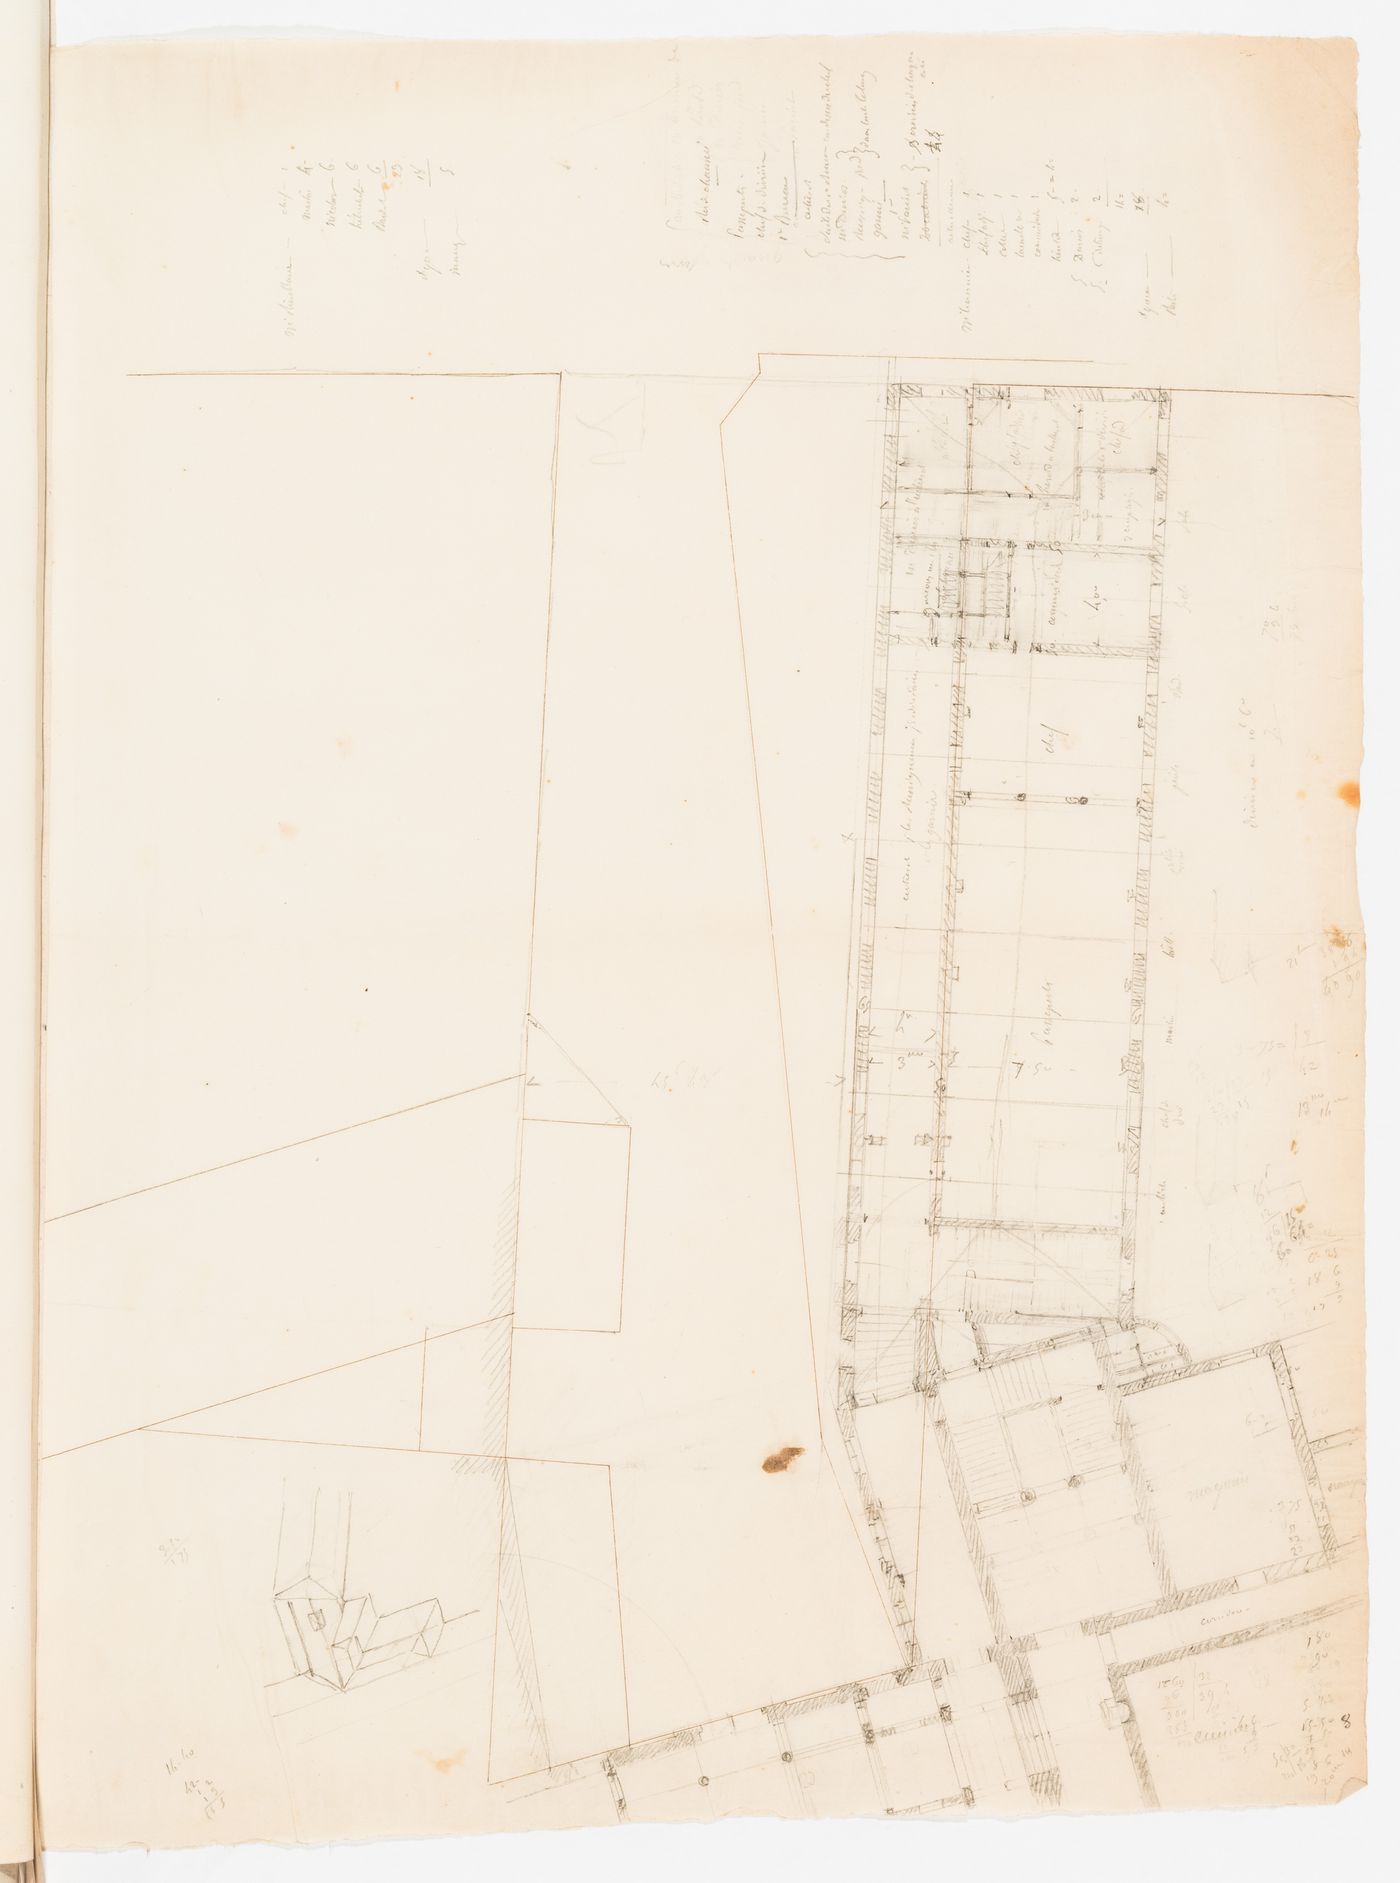 Project for alterations to the Préfecture de police, rue de Jérusalem, Paris: Partial sketch plan for the building with the passport office